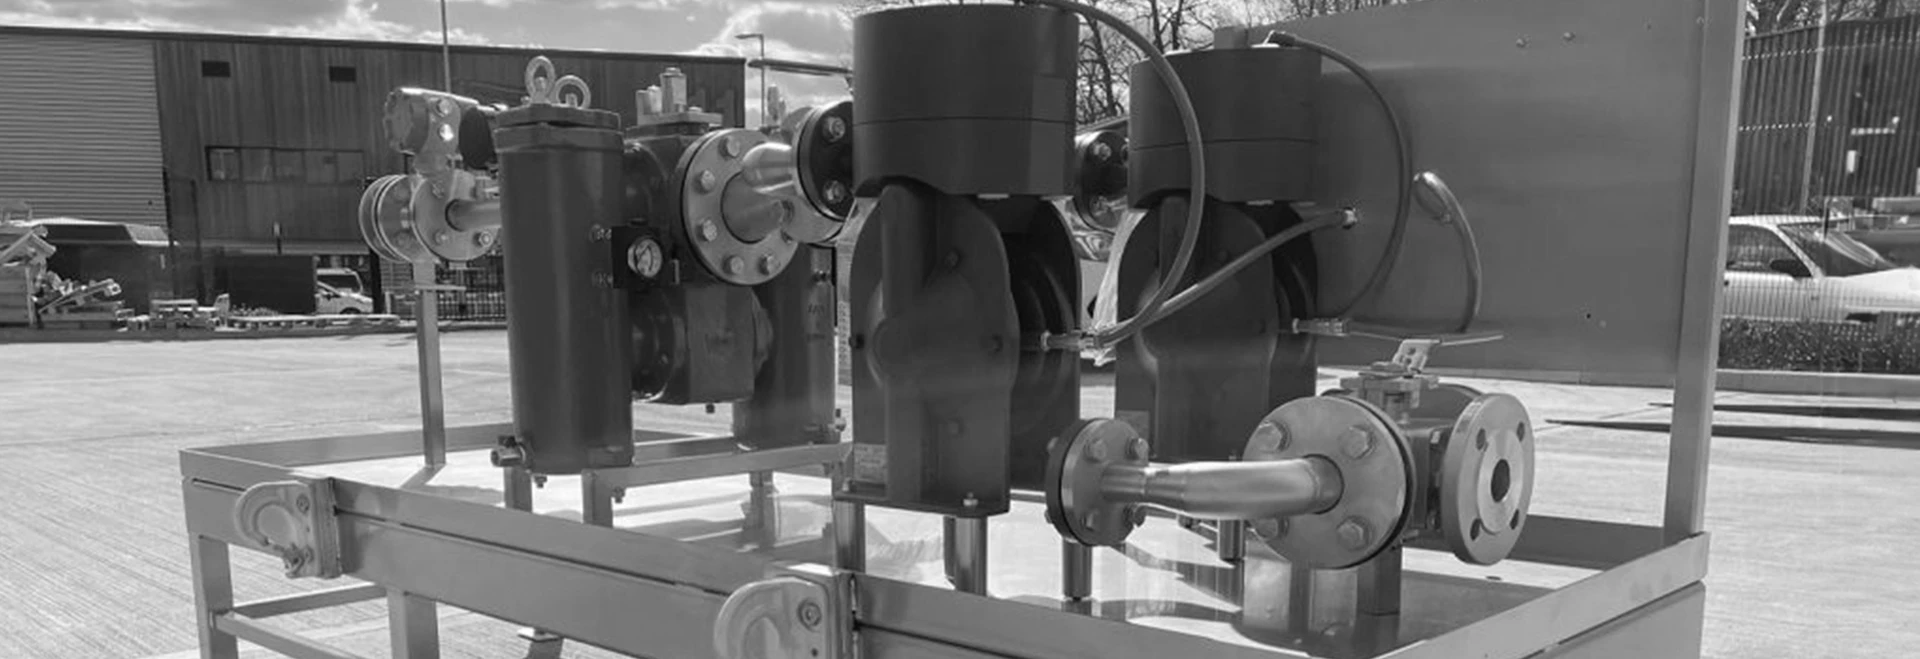 This is a photo of the pump system mentioned in this case study